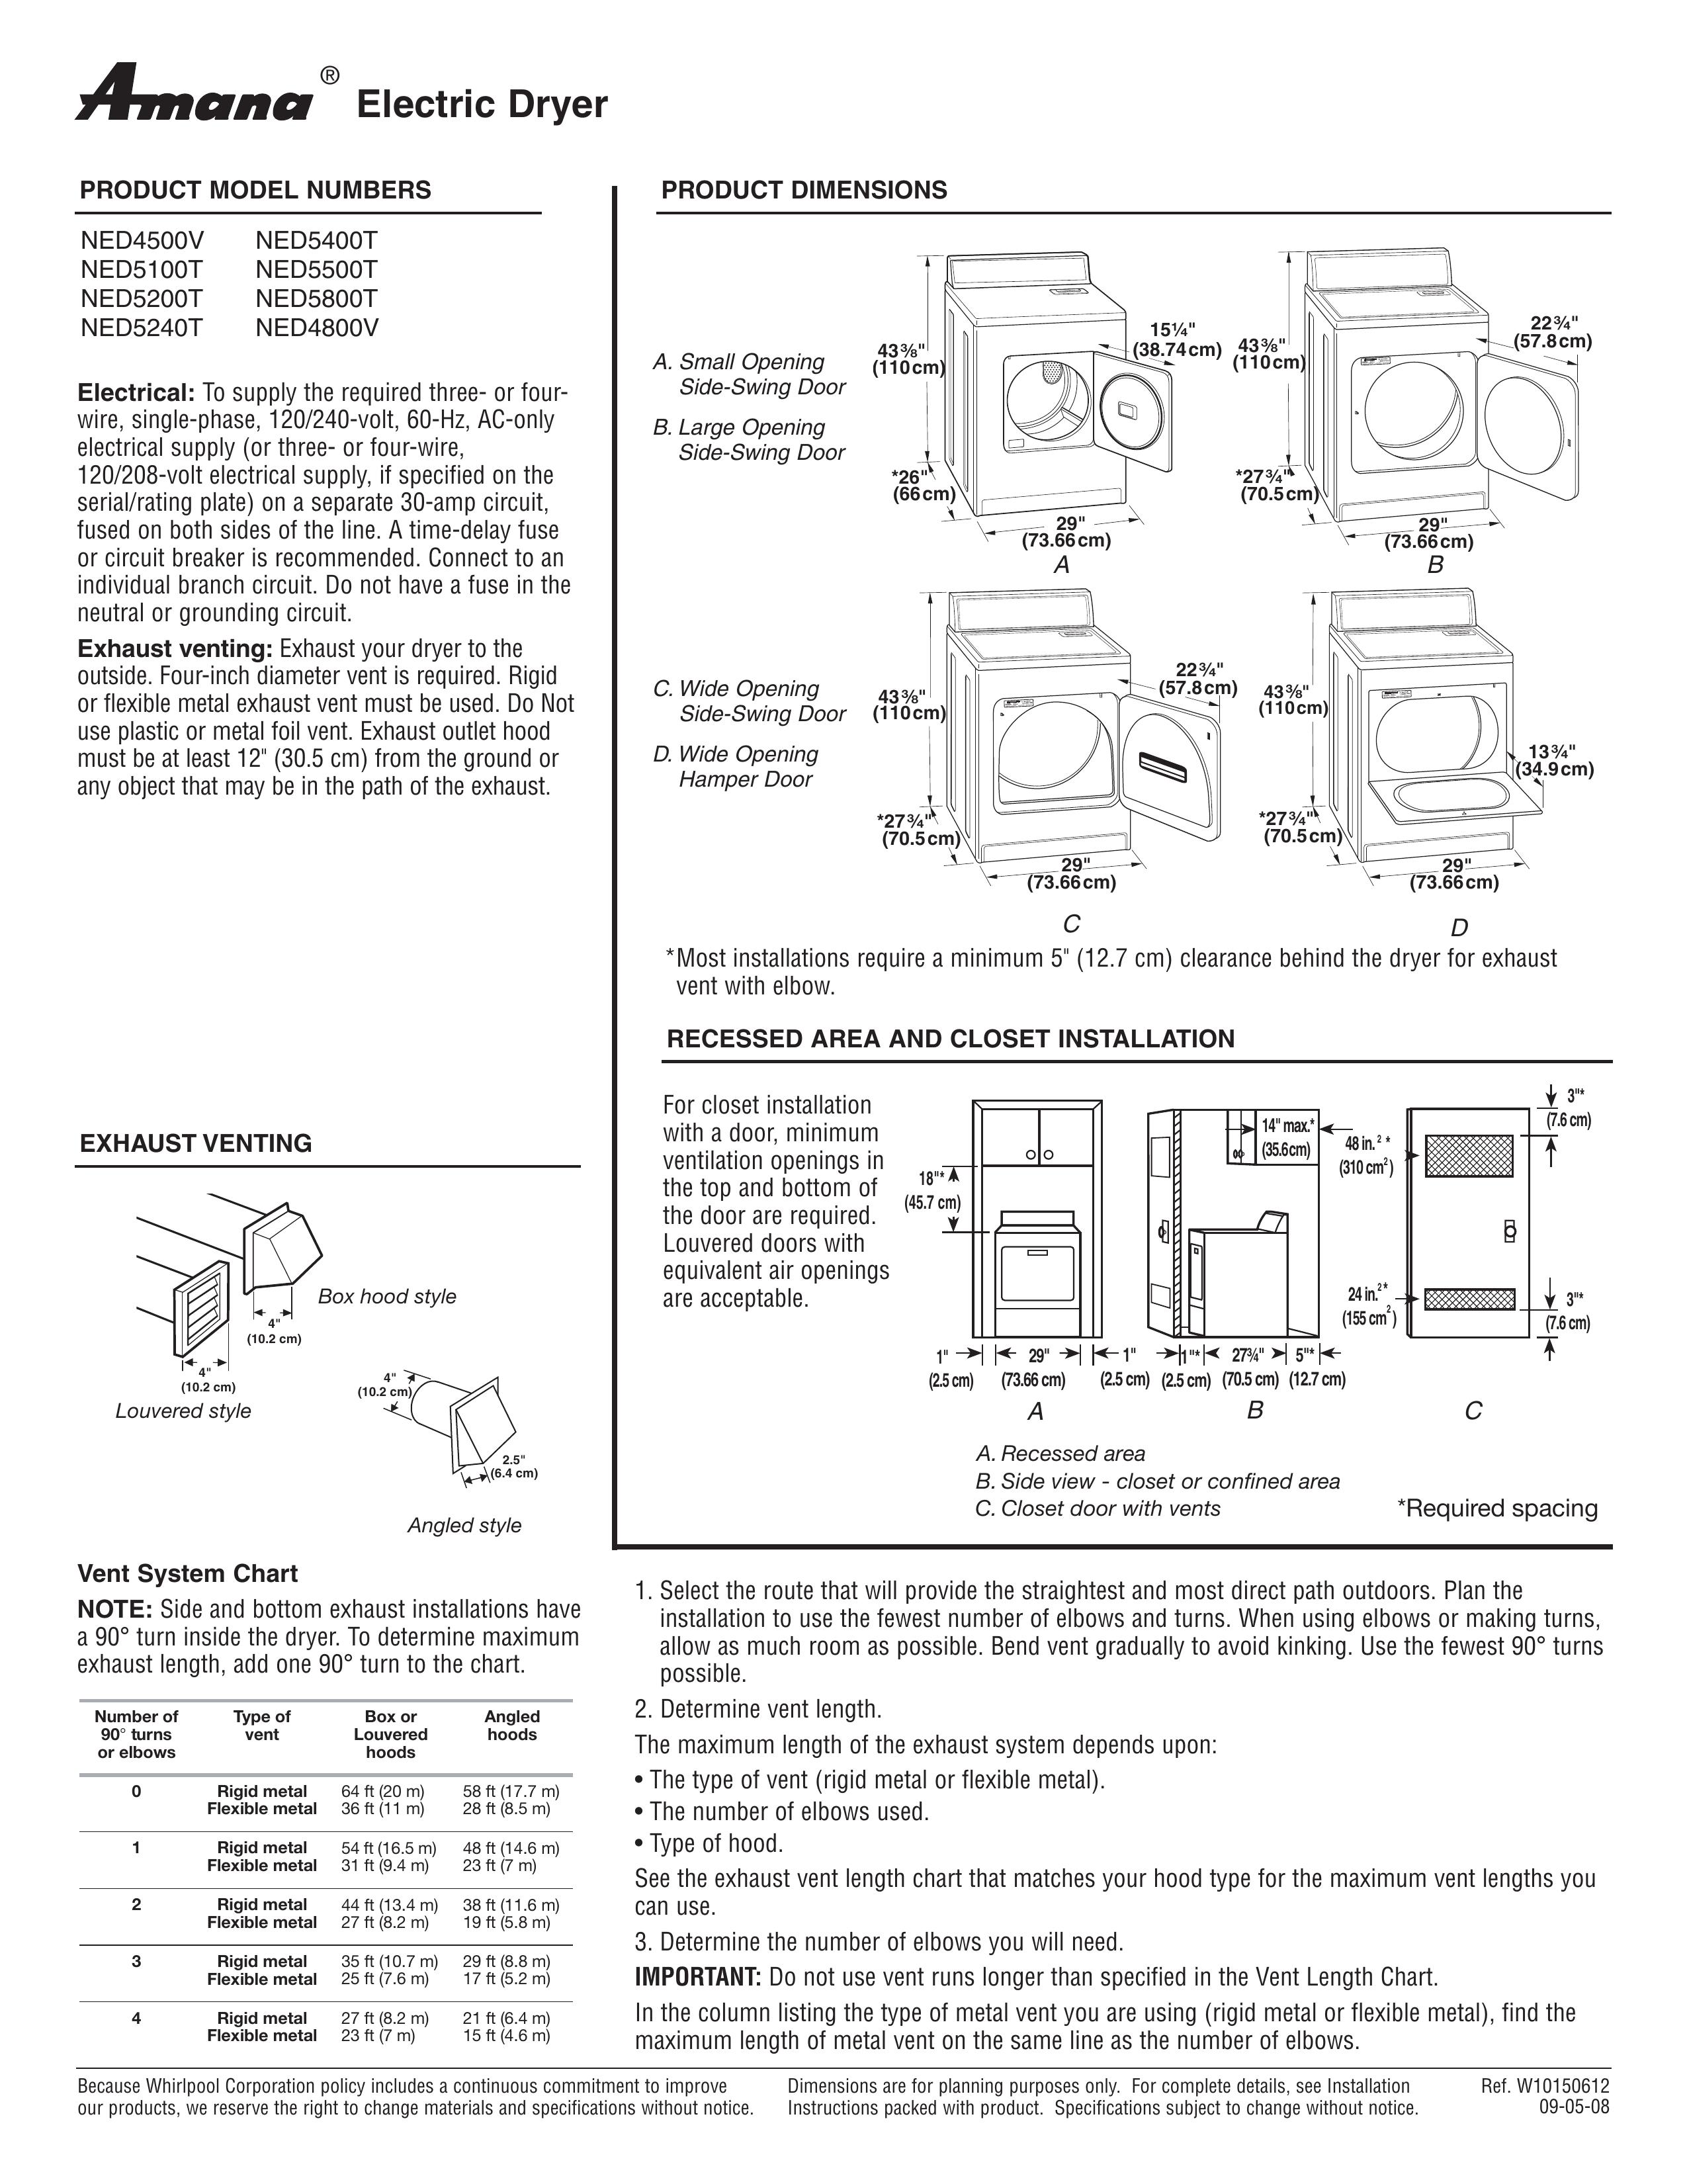 Amana NED4500V Clothes Dryer User Manual